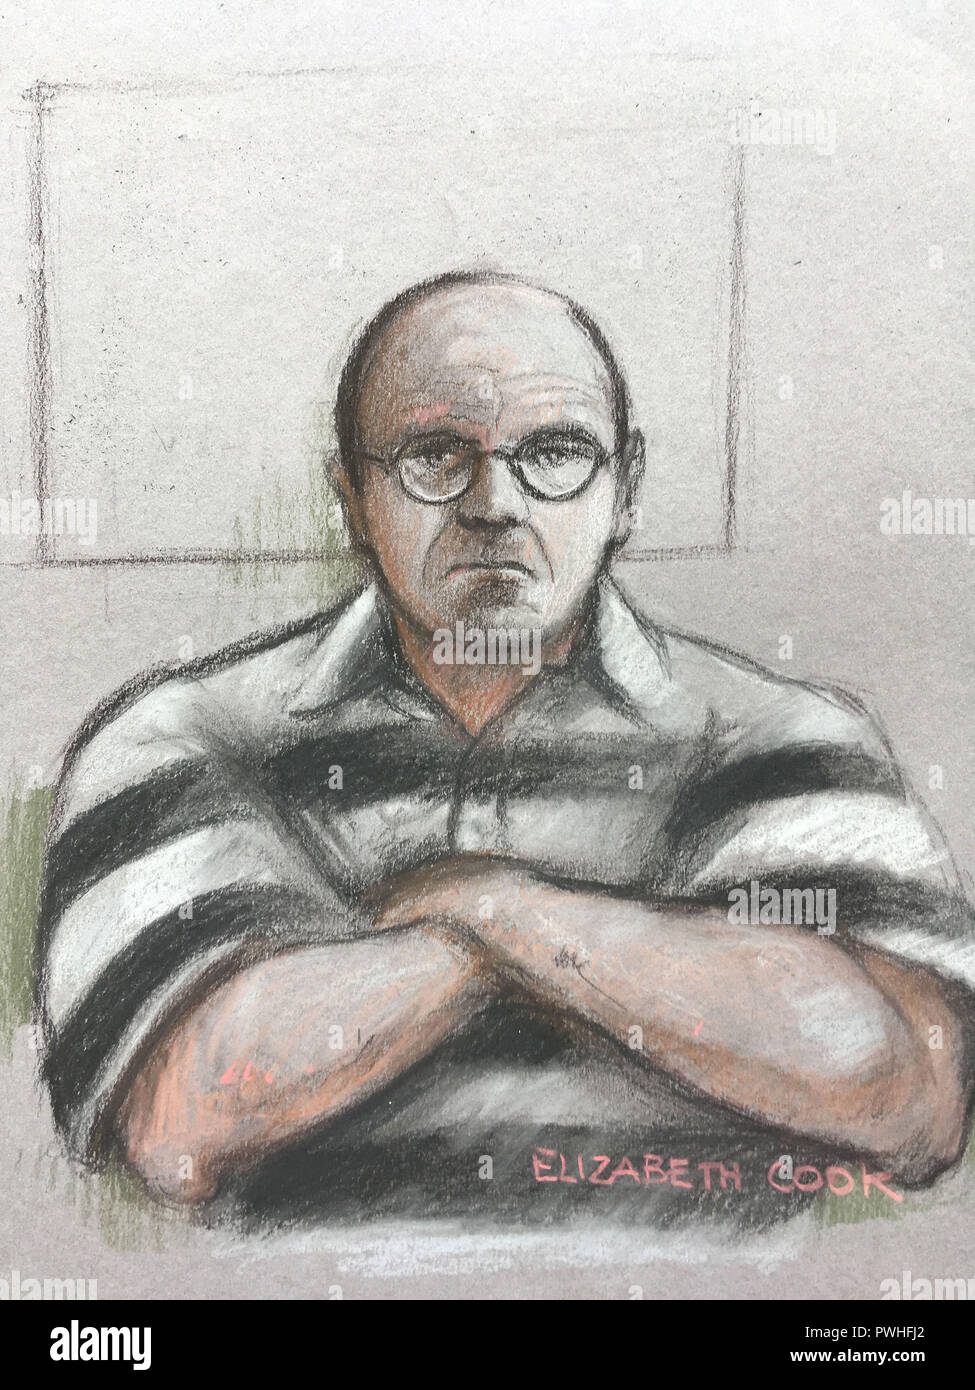 Court artist sketch by Elizabeth Cook of Russell Bishop in custody appearing via video link for a plea hearing at the Old Bailey where he is accused of the murders of nine-year-olds Nicola Fellows and Karen Hadaway more than thirty years ago. Stock Photo